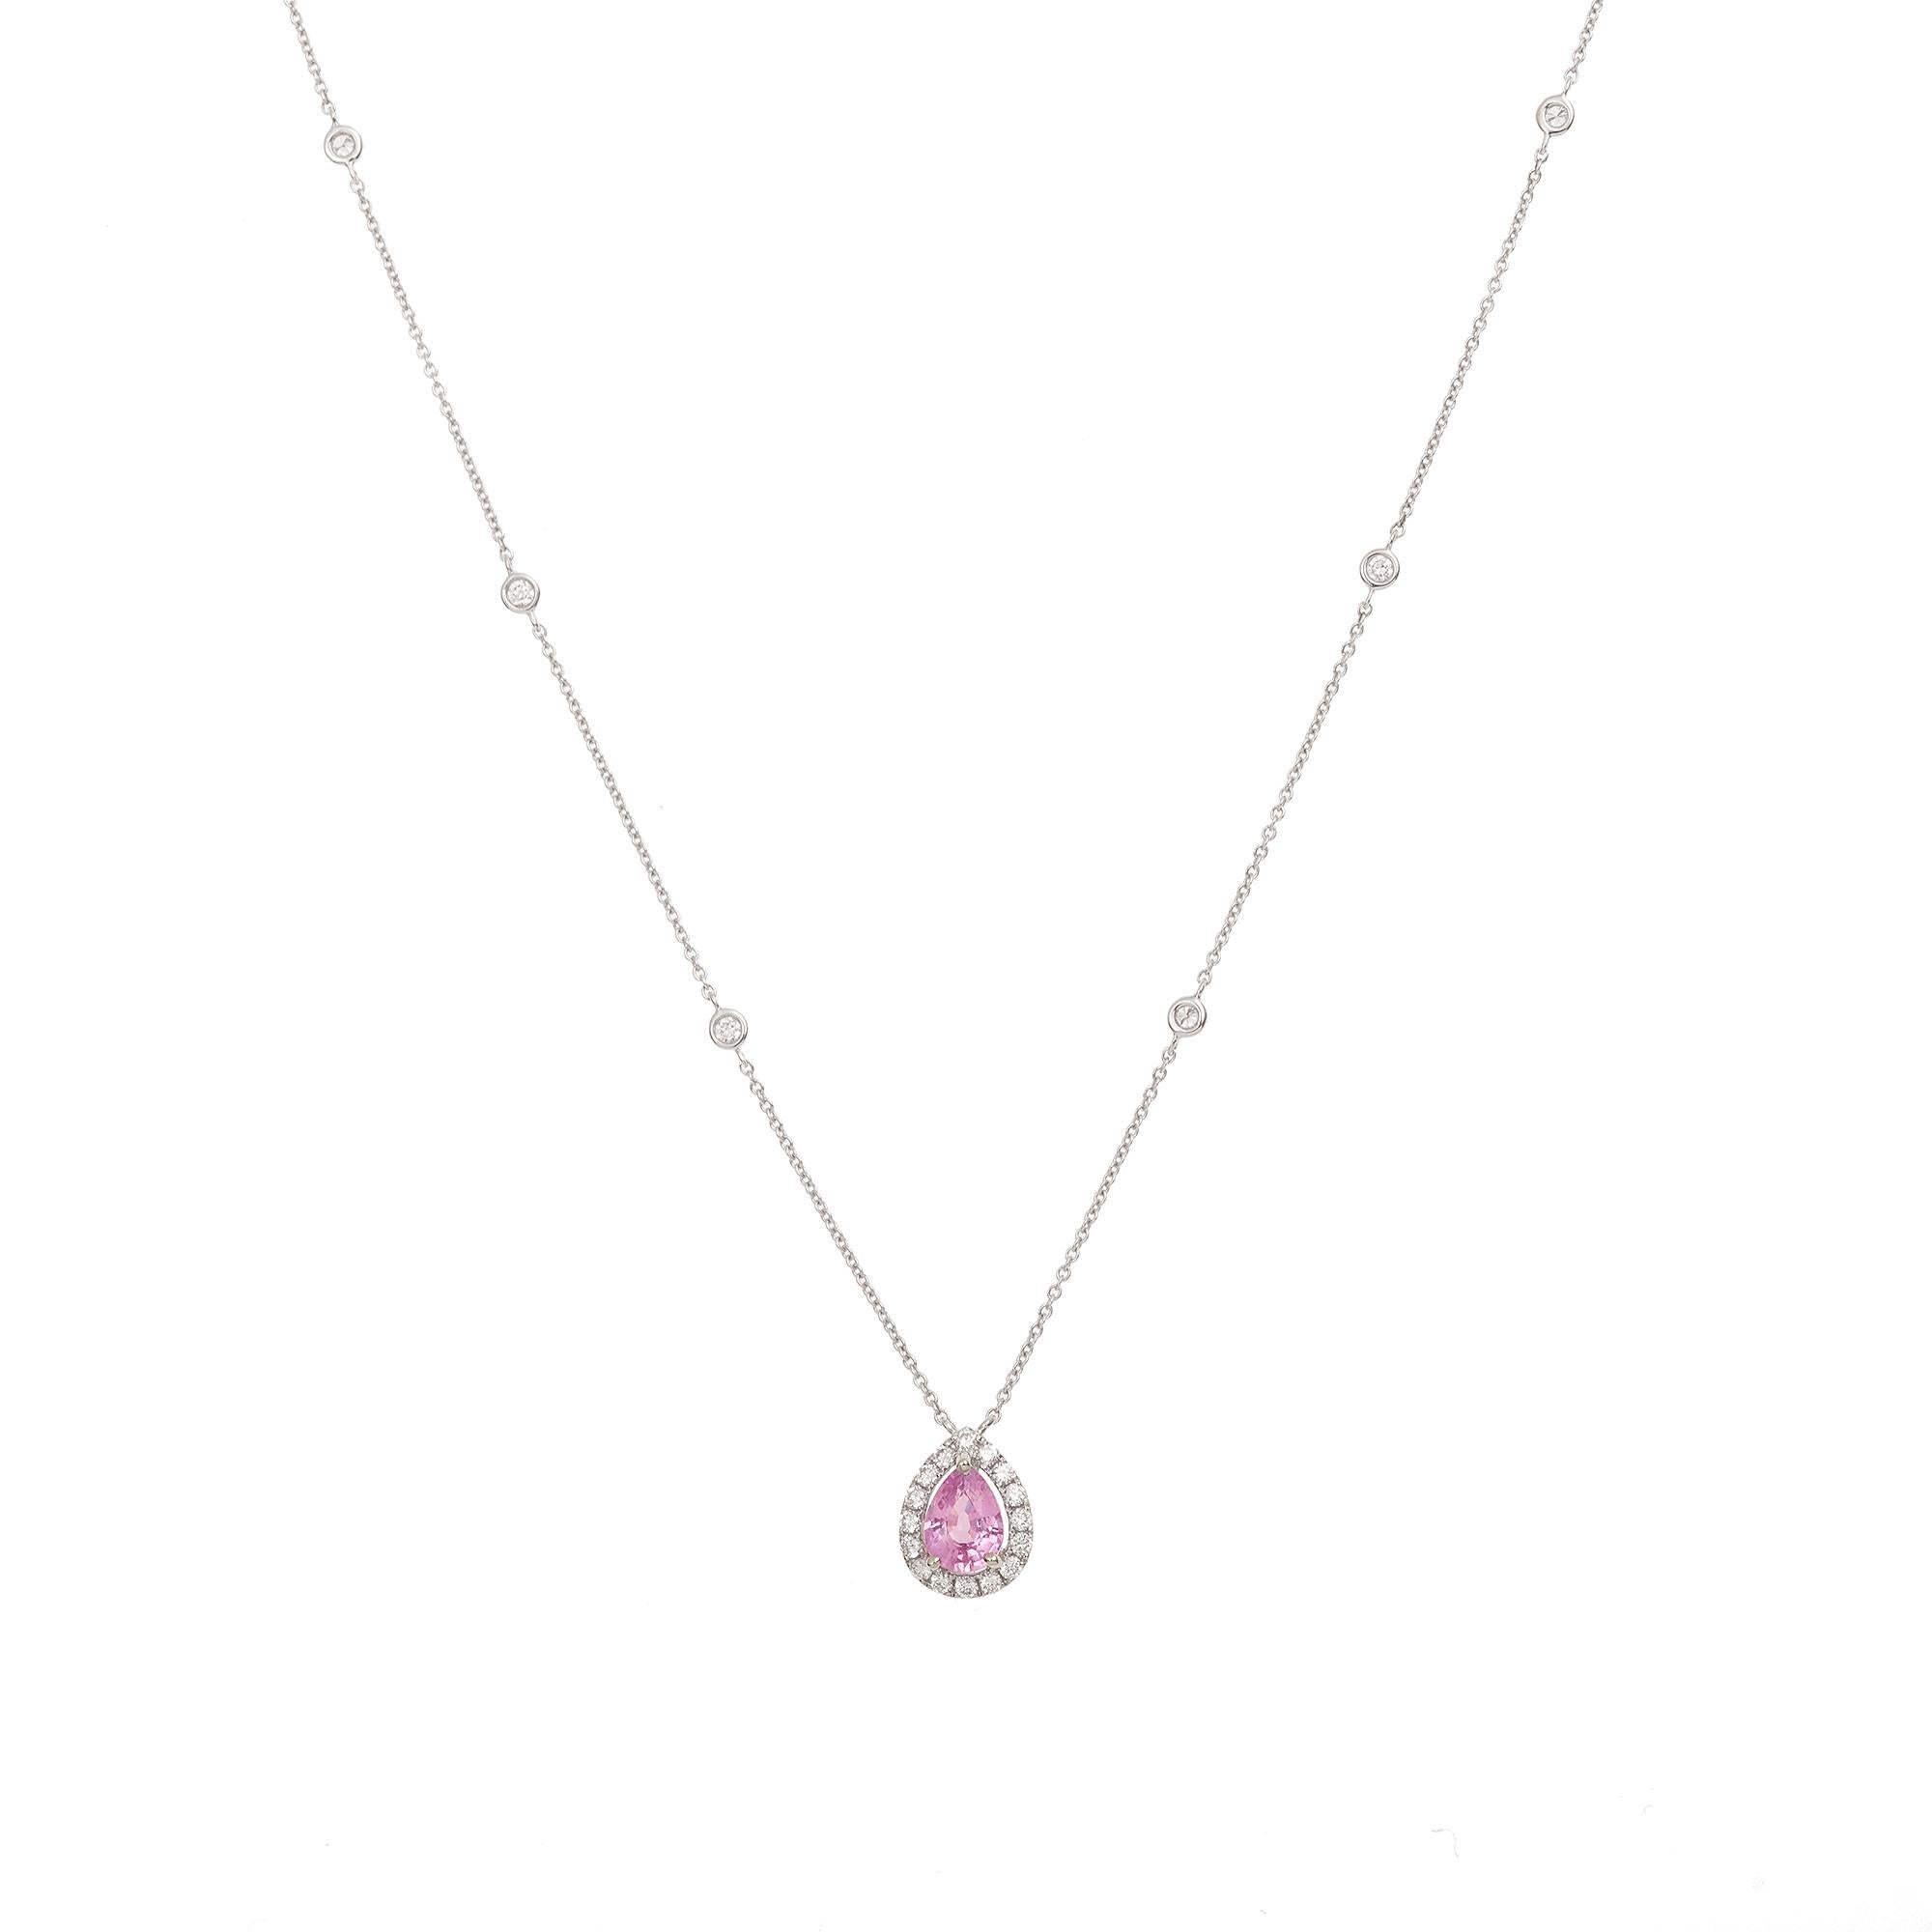 Beautiful necklace in white gold, pear shape set with diamonds and a lovely pear cut pink sapphire.

Adjustable length. 6 little closed-set diamonds adorn the chain.

Dimensions : 1.07 x 0.85 x 24 cm (0.421 x 0.334 x 9.75 inches)

Pink sapphire